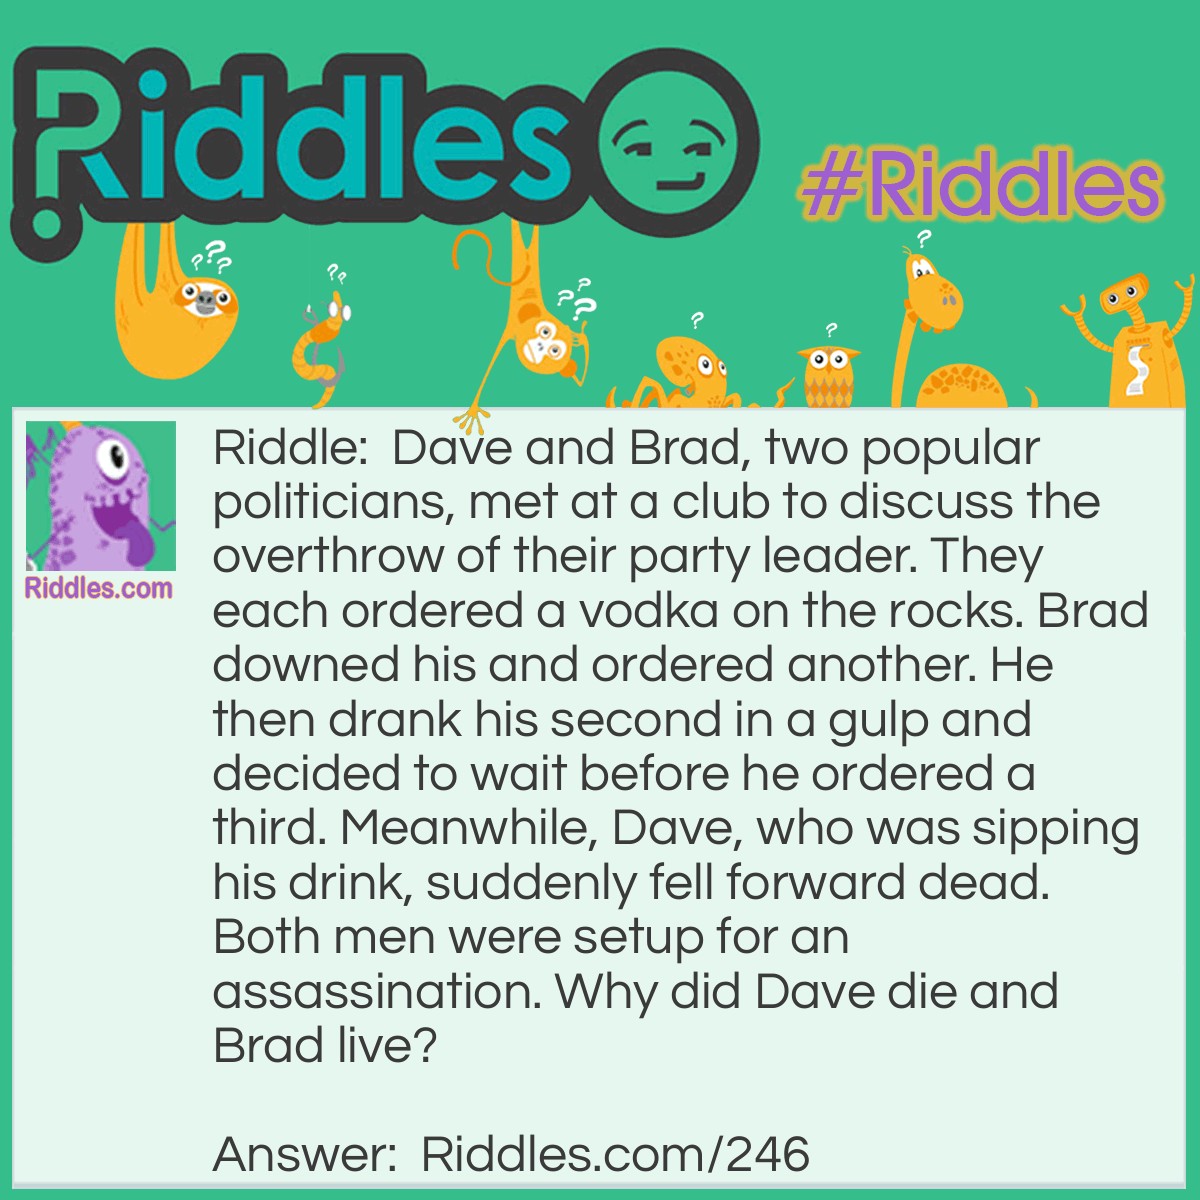 Riddle: Dave and Brad, two popular politicians, met at a club to discuss the overthrow of their party leader. They each ordered a vodka on the rocks. Brad downed his and ordered another. He then drank his second in a gulp and decided to wait before he ordered a third. Meanwhile, Dave, who was sipping his drink, suddenly fell forward dead. Both men were set up for assassination. Why did Dave die and Brad live? Answer: Both Dave and Brad were given drinks with poisoned ice cubes. Brad drank his drinks so quickly that the ice didn't have time to melt and release the poison.